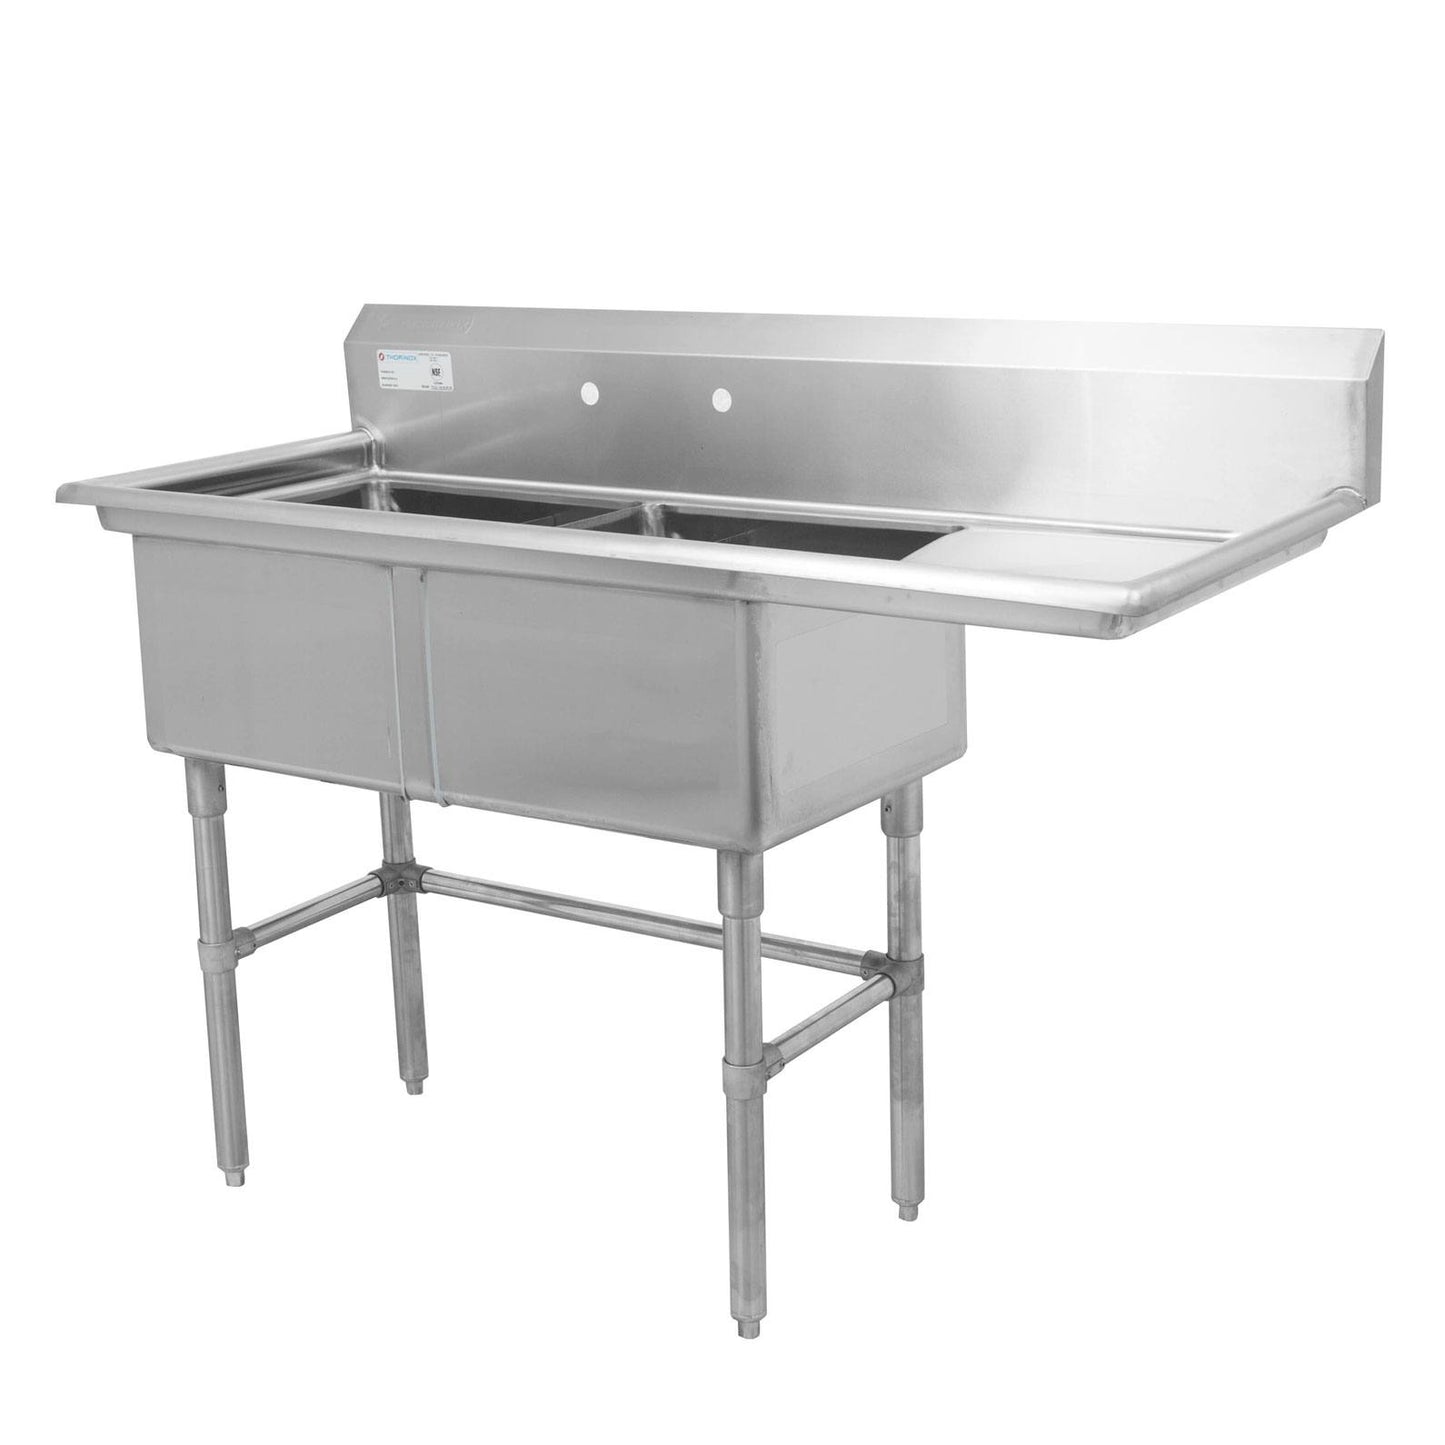 Thorinox TDS-1818-R18 18" x 18" x 11" Corner Drain Two Compartment Sink With Right Drain Board